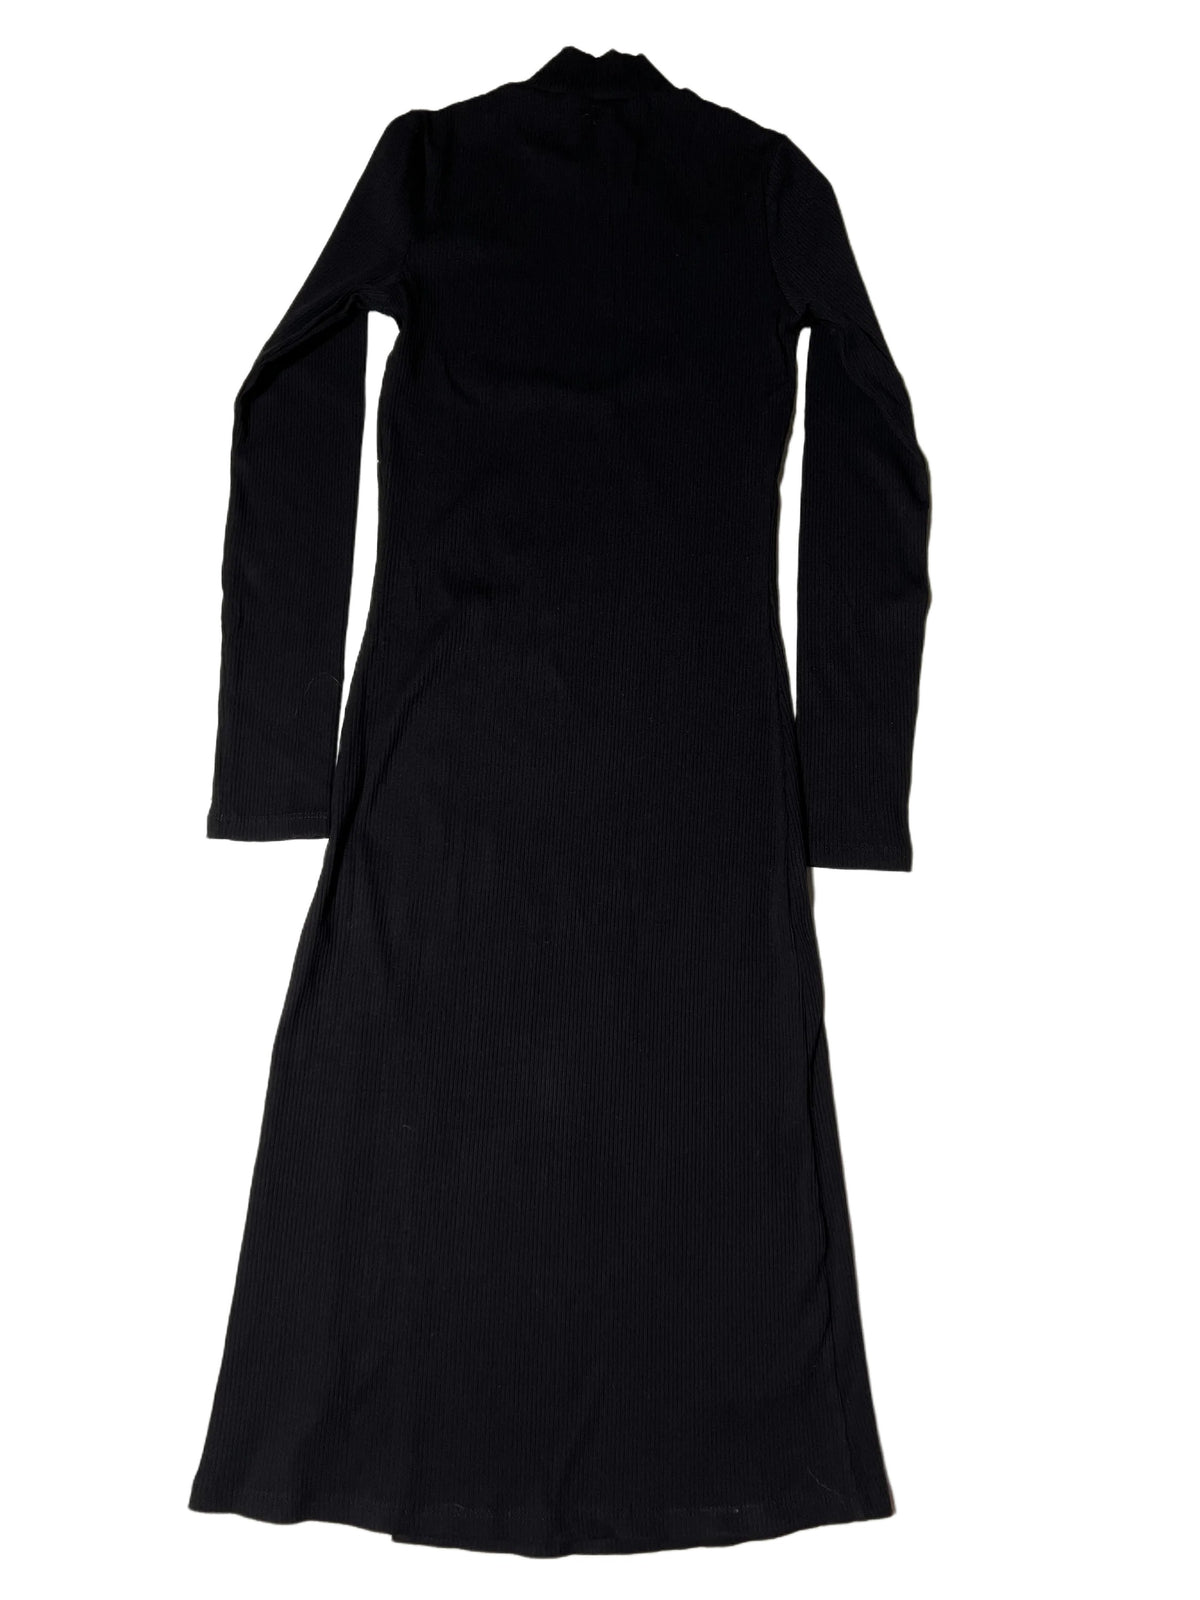 Billie- Black Ribbed Long Sleeve Maxi Dress NEW WITH TAGS